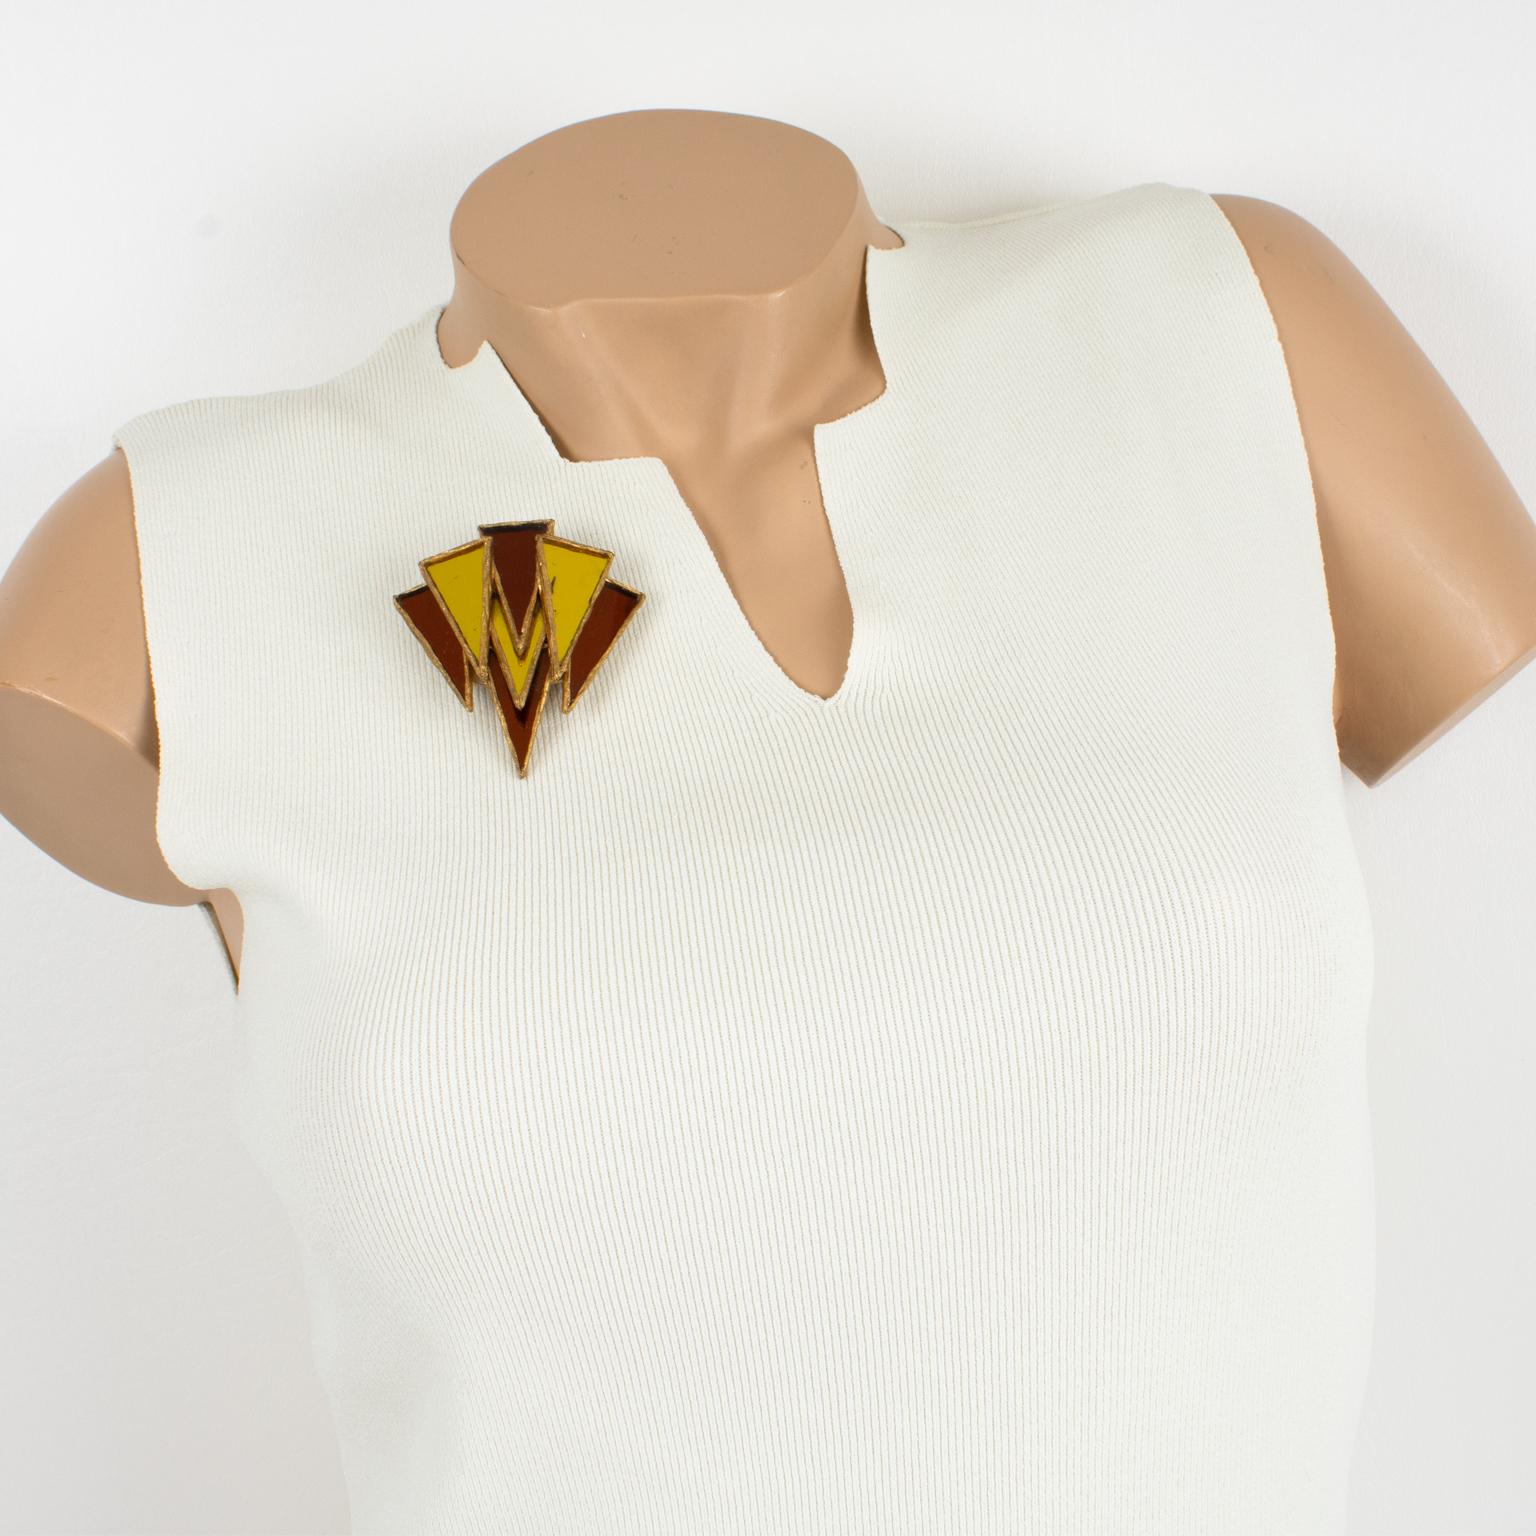 It is a striking Talosel or resin pin brooch designed by Irena Jaworska in the 1970s. 
The piece features a dimensional geometric modernist shape in gilded resin framing, topped with triangle mirrors in yellow and burnt orange colors. The pin is